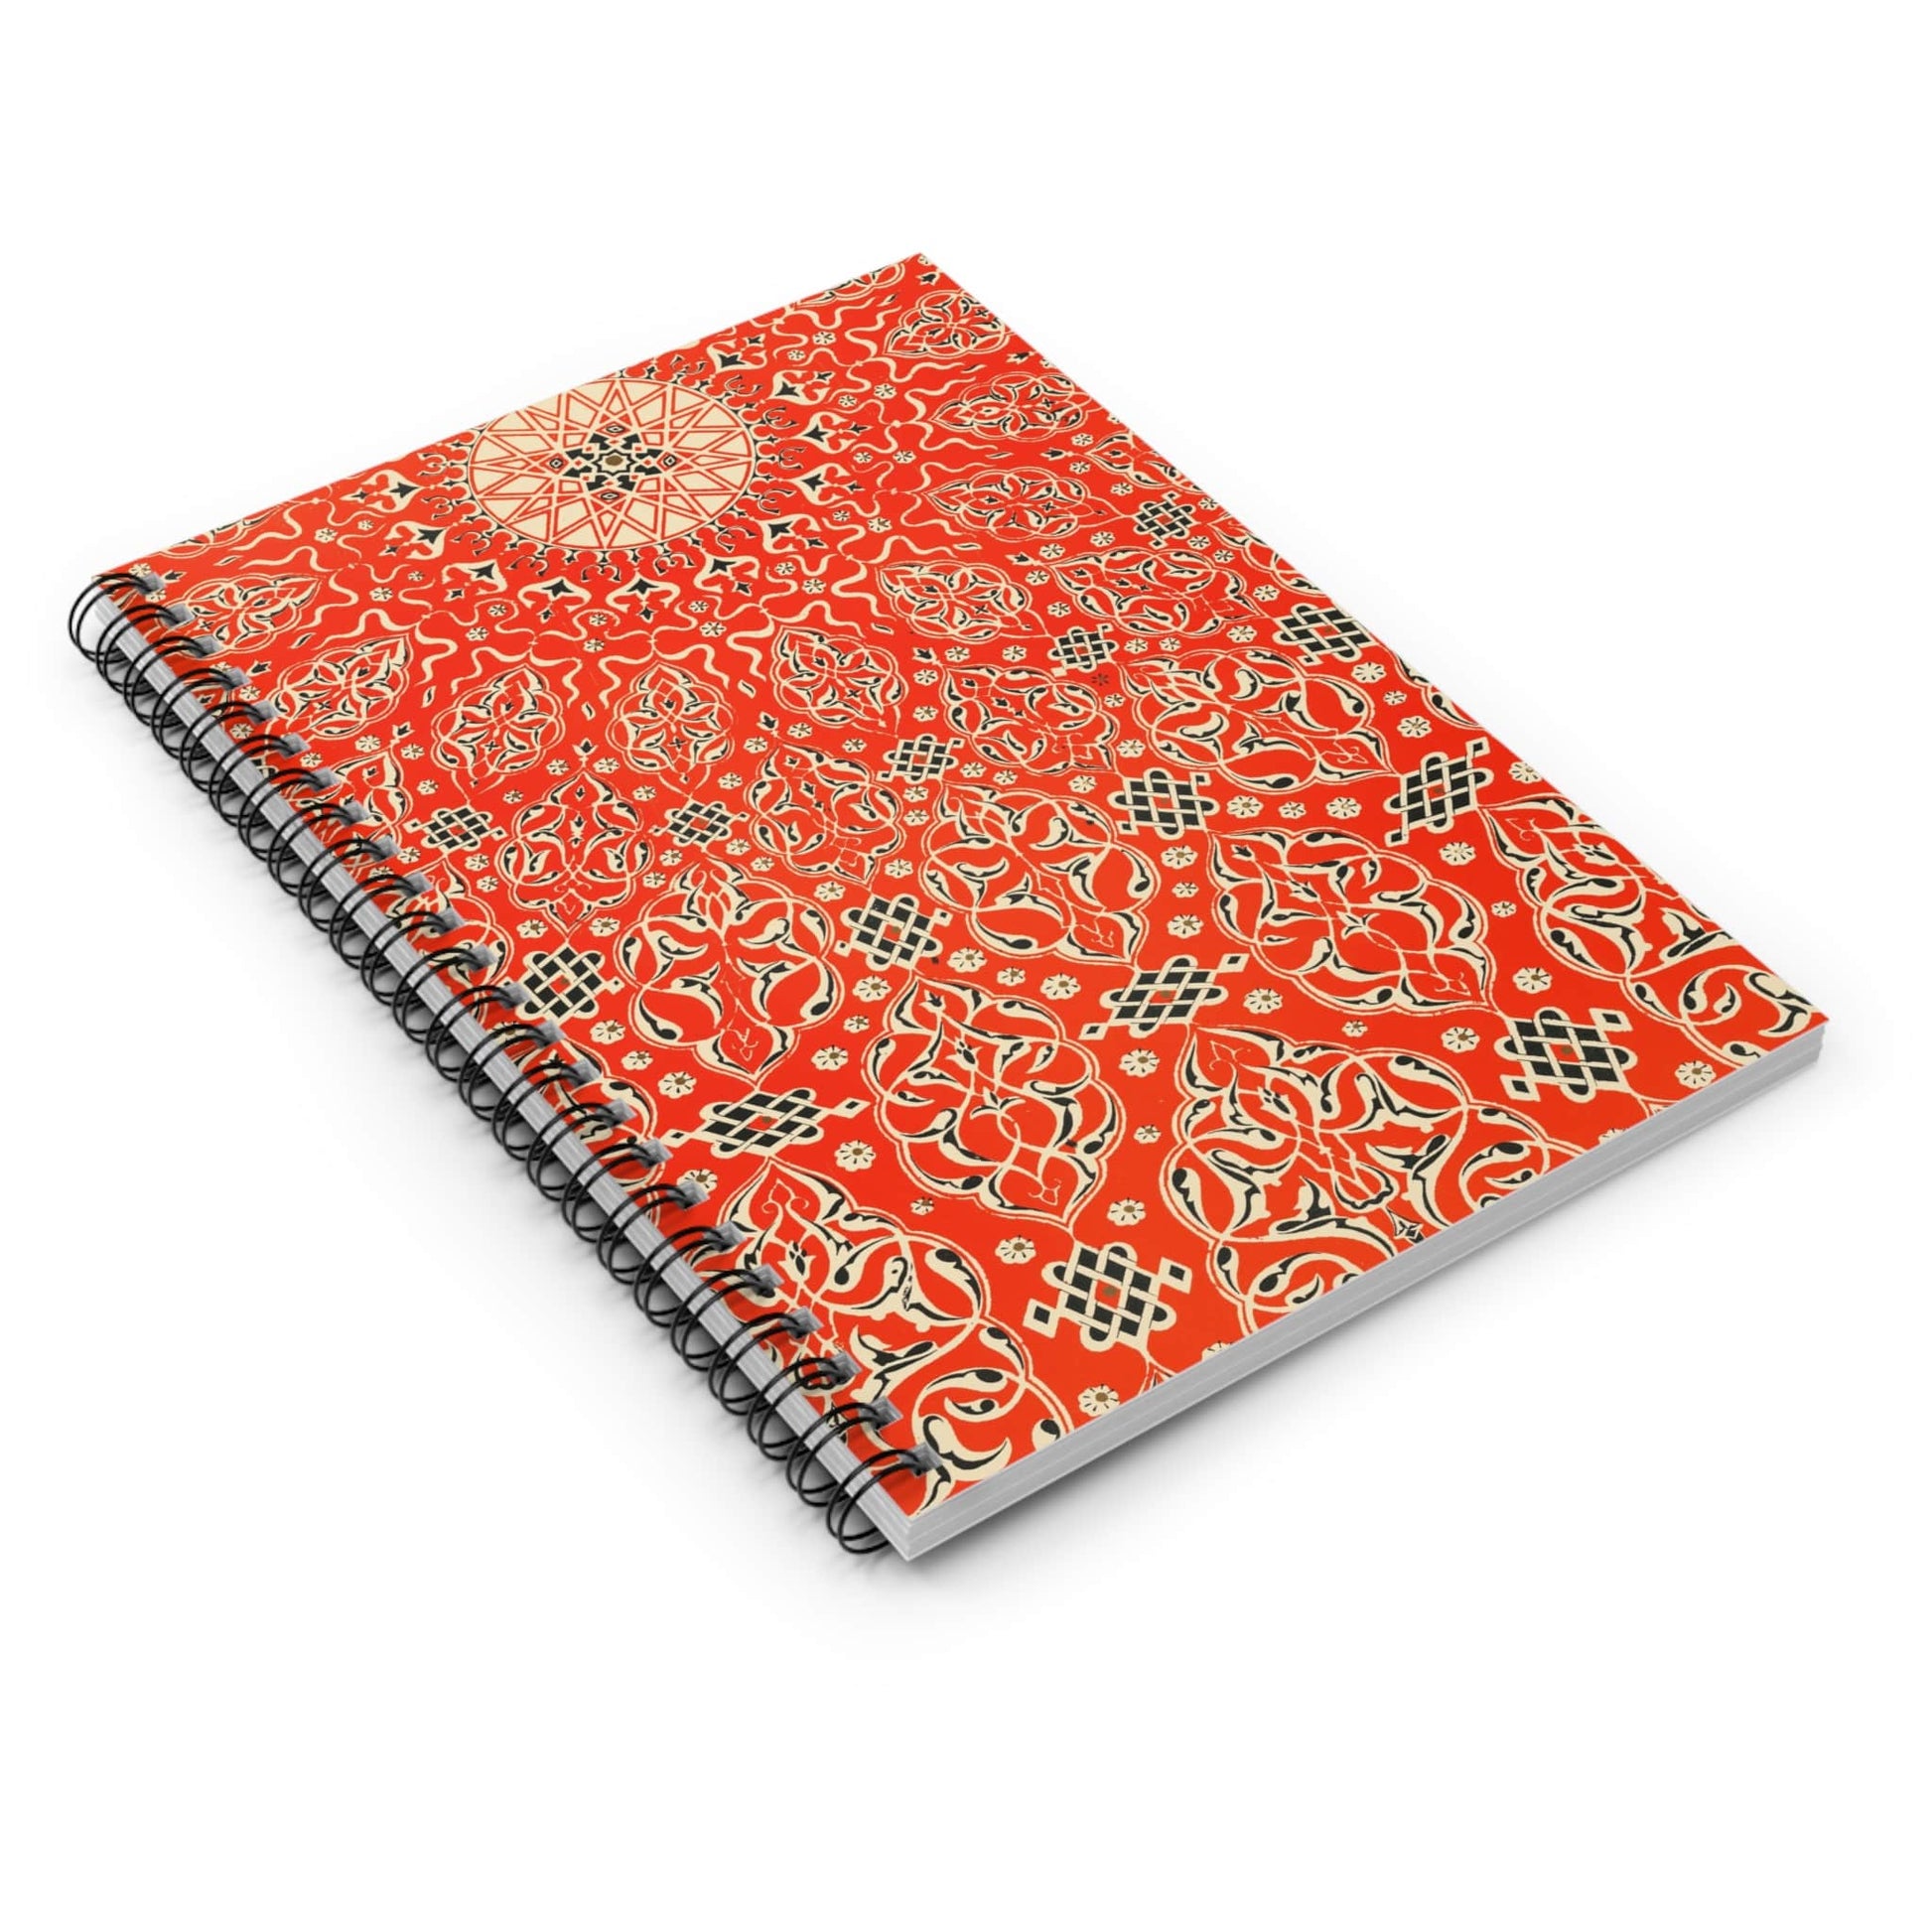 Bright Red Pattern Spiral Notebook Laying Flat on White Surface